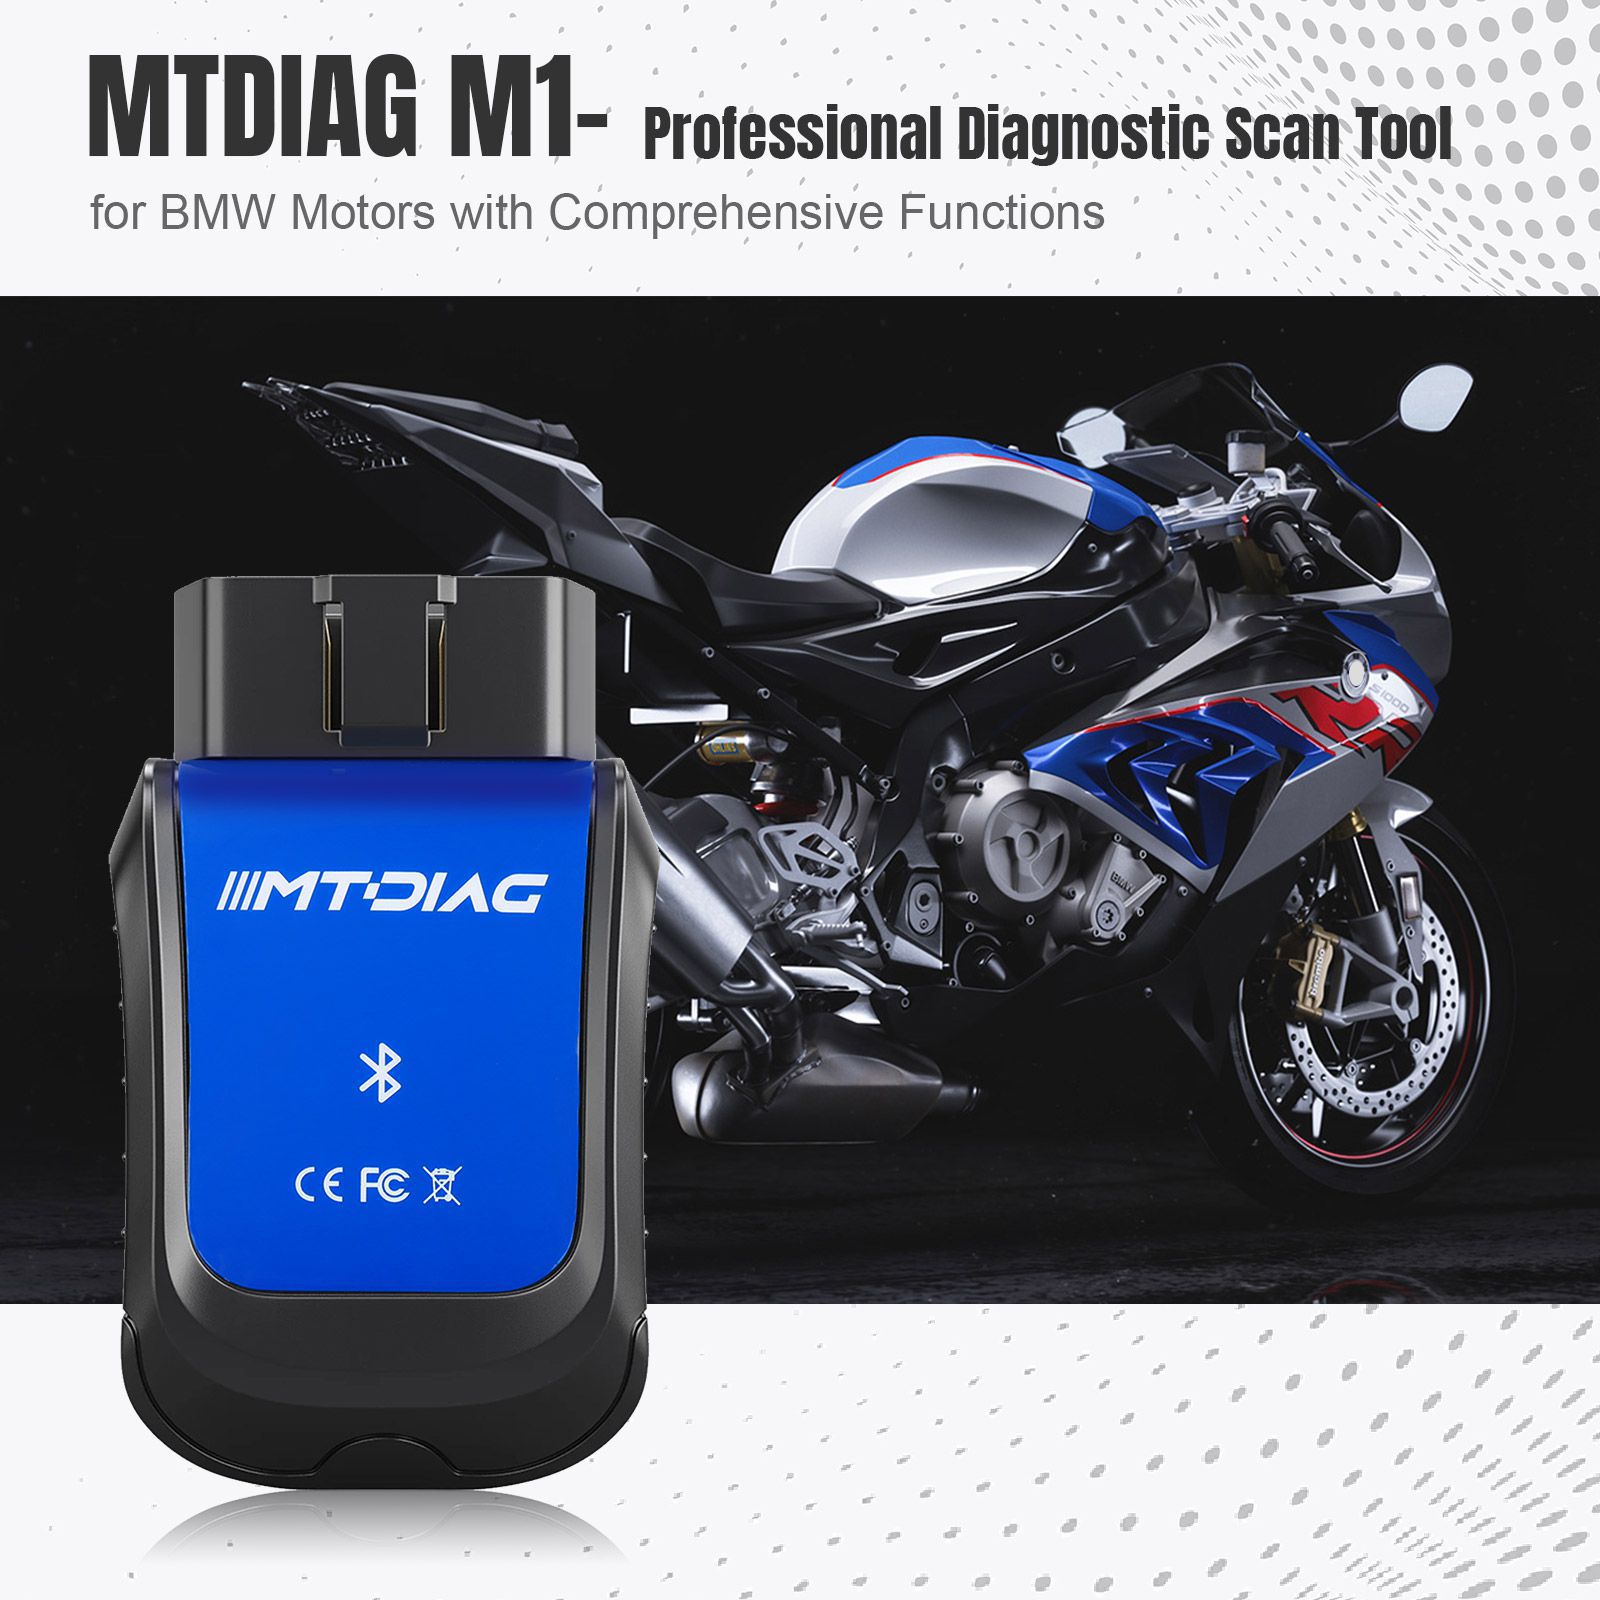 Mtdiag M1 BMW Motorcycle Professional Diagnosis Scanning Tool fully Functional Custom mobile Diagnosis Tool